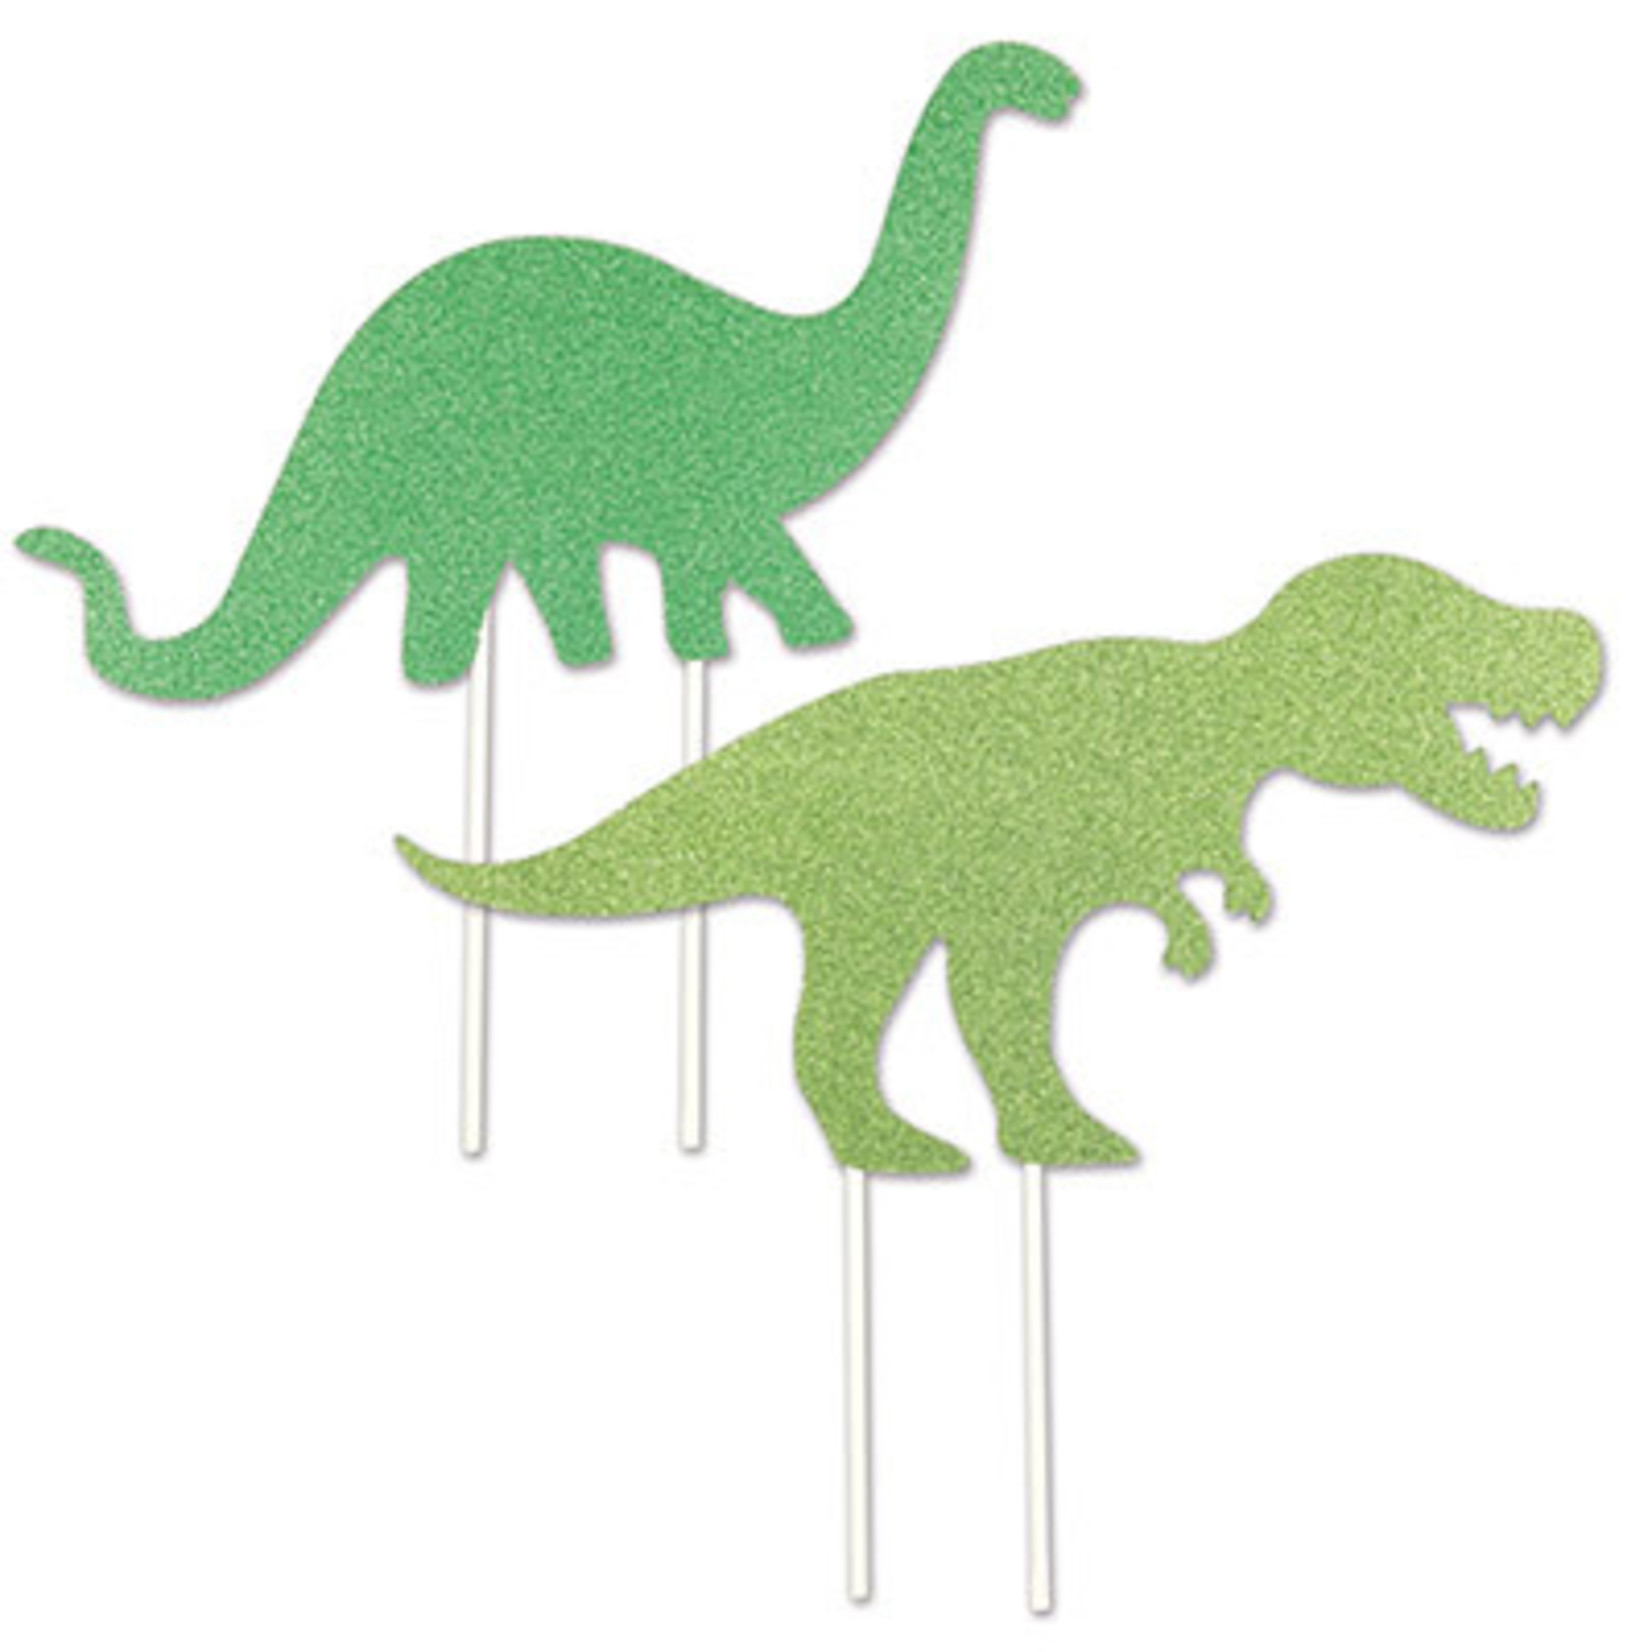 Beistle 8" Dinosaur Cake Toppers - 2ct.